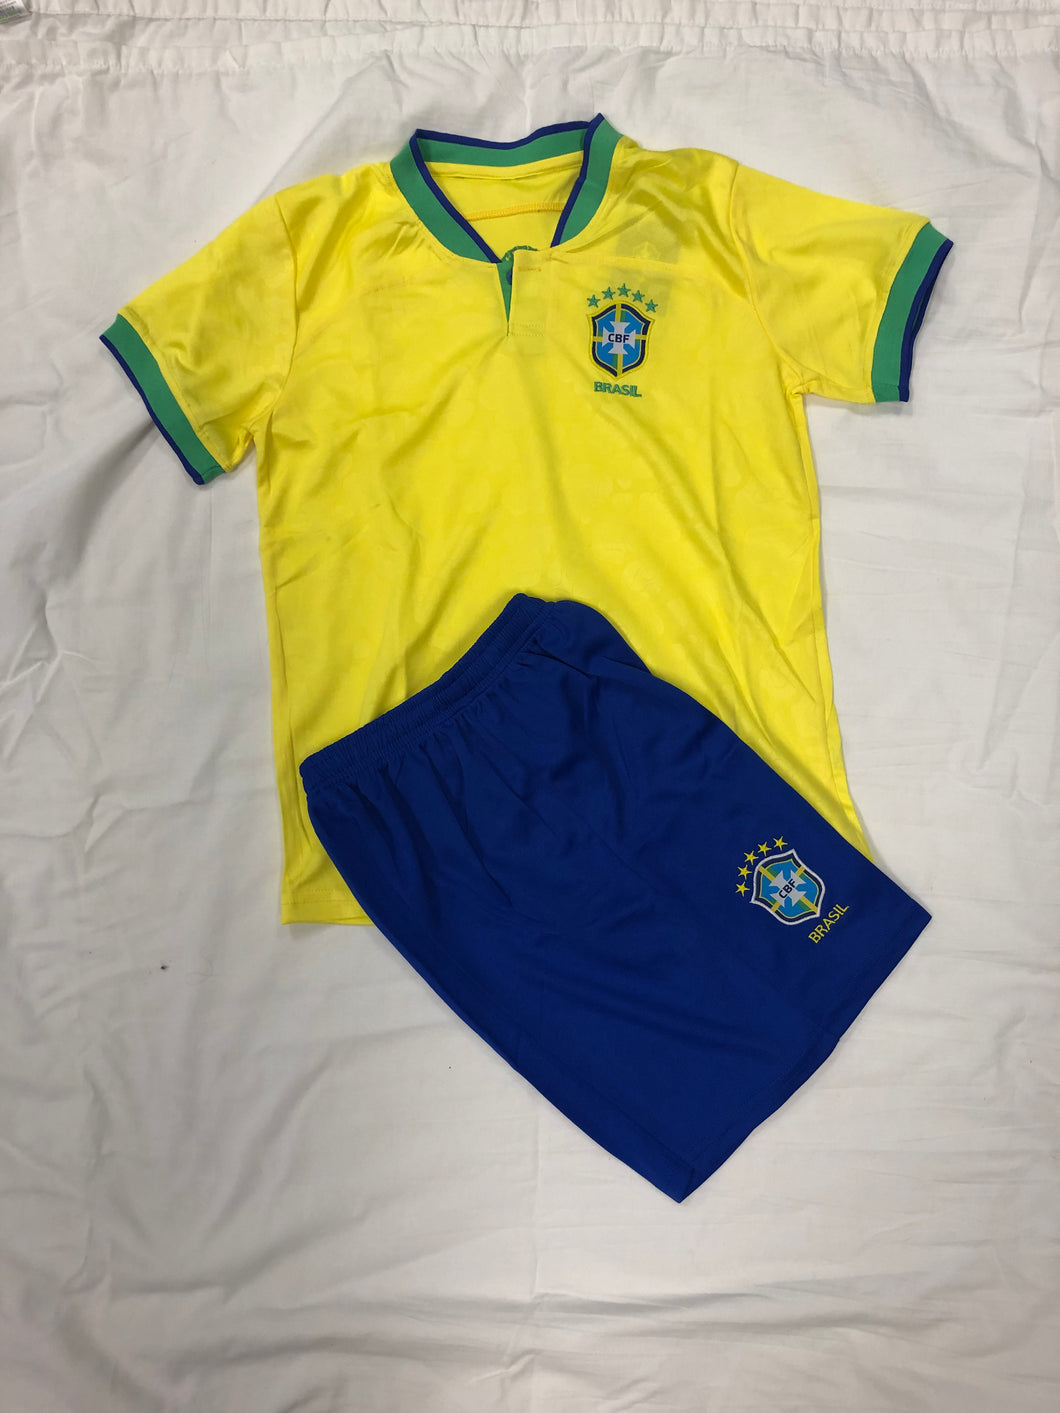 Brazil World Cup Adult Home kit